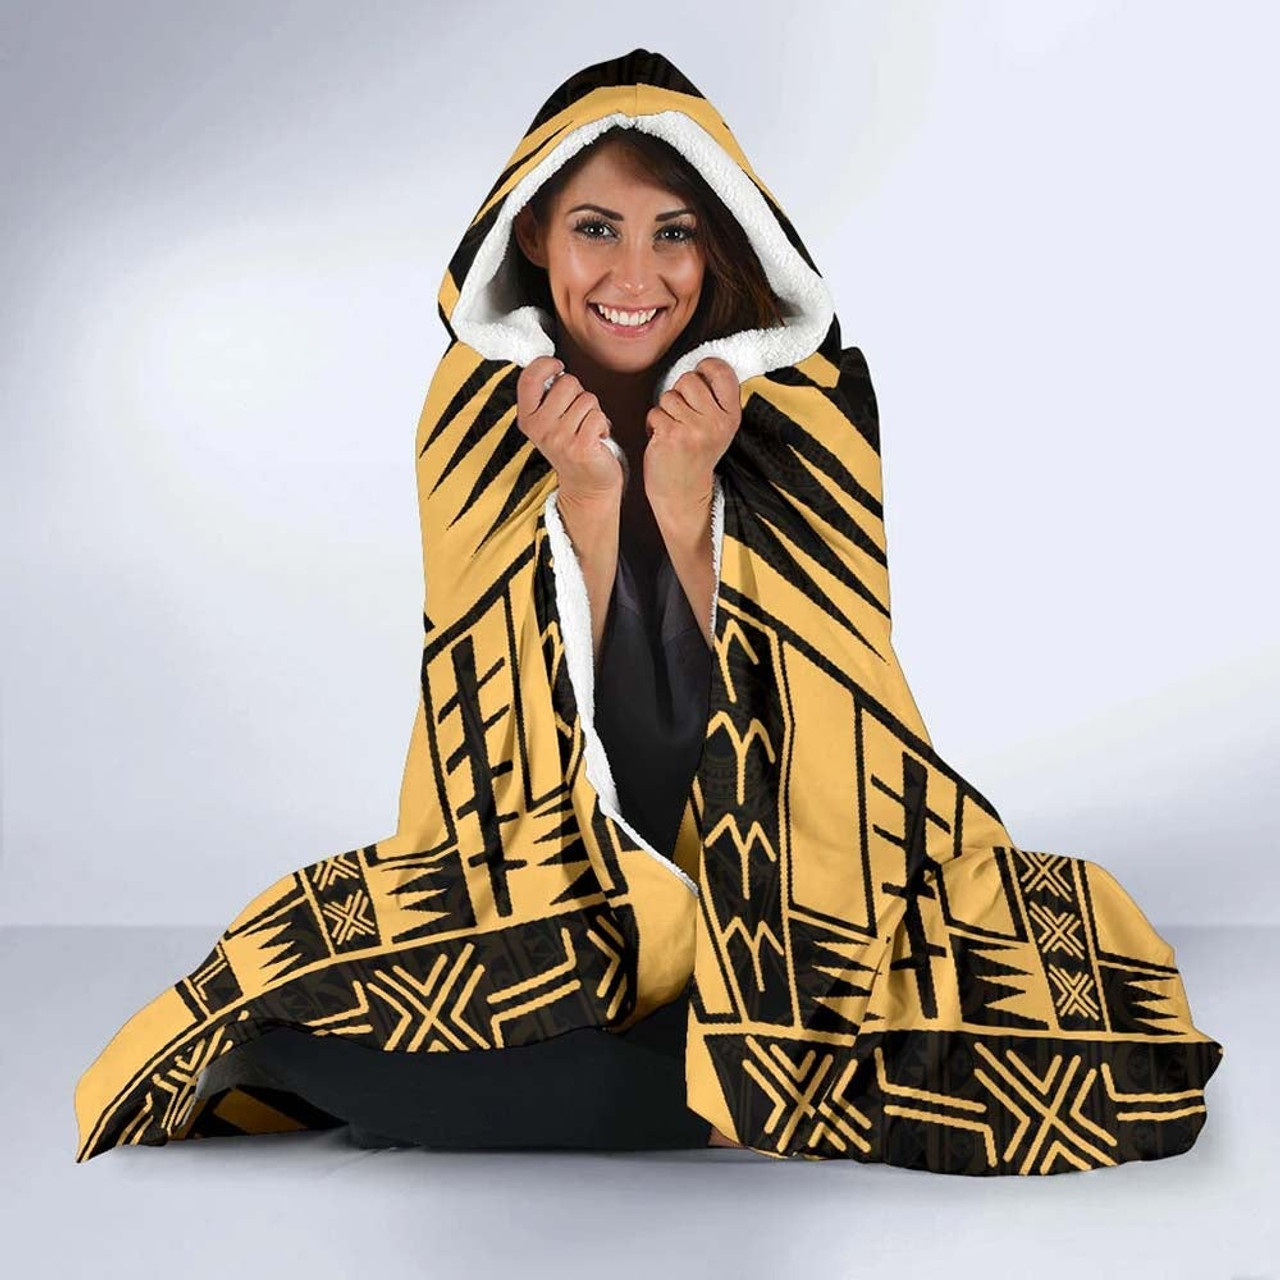 Federated States of Micronesia Hooded Blanket - Polynesian Tattoo Gold 3